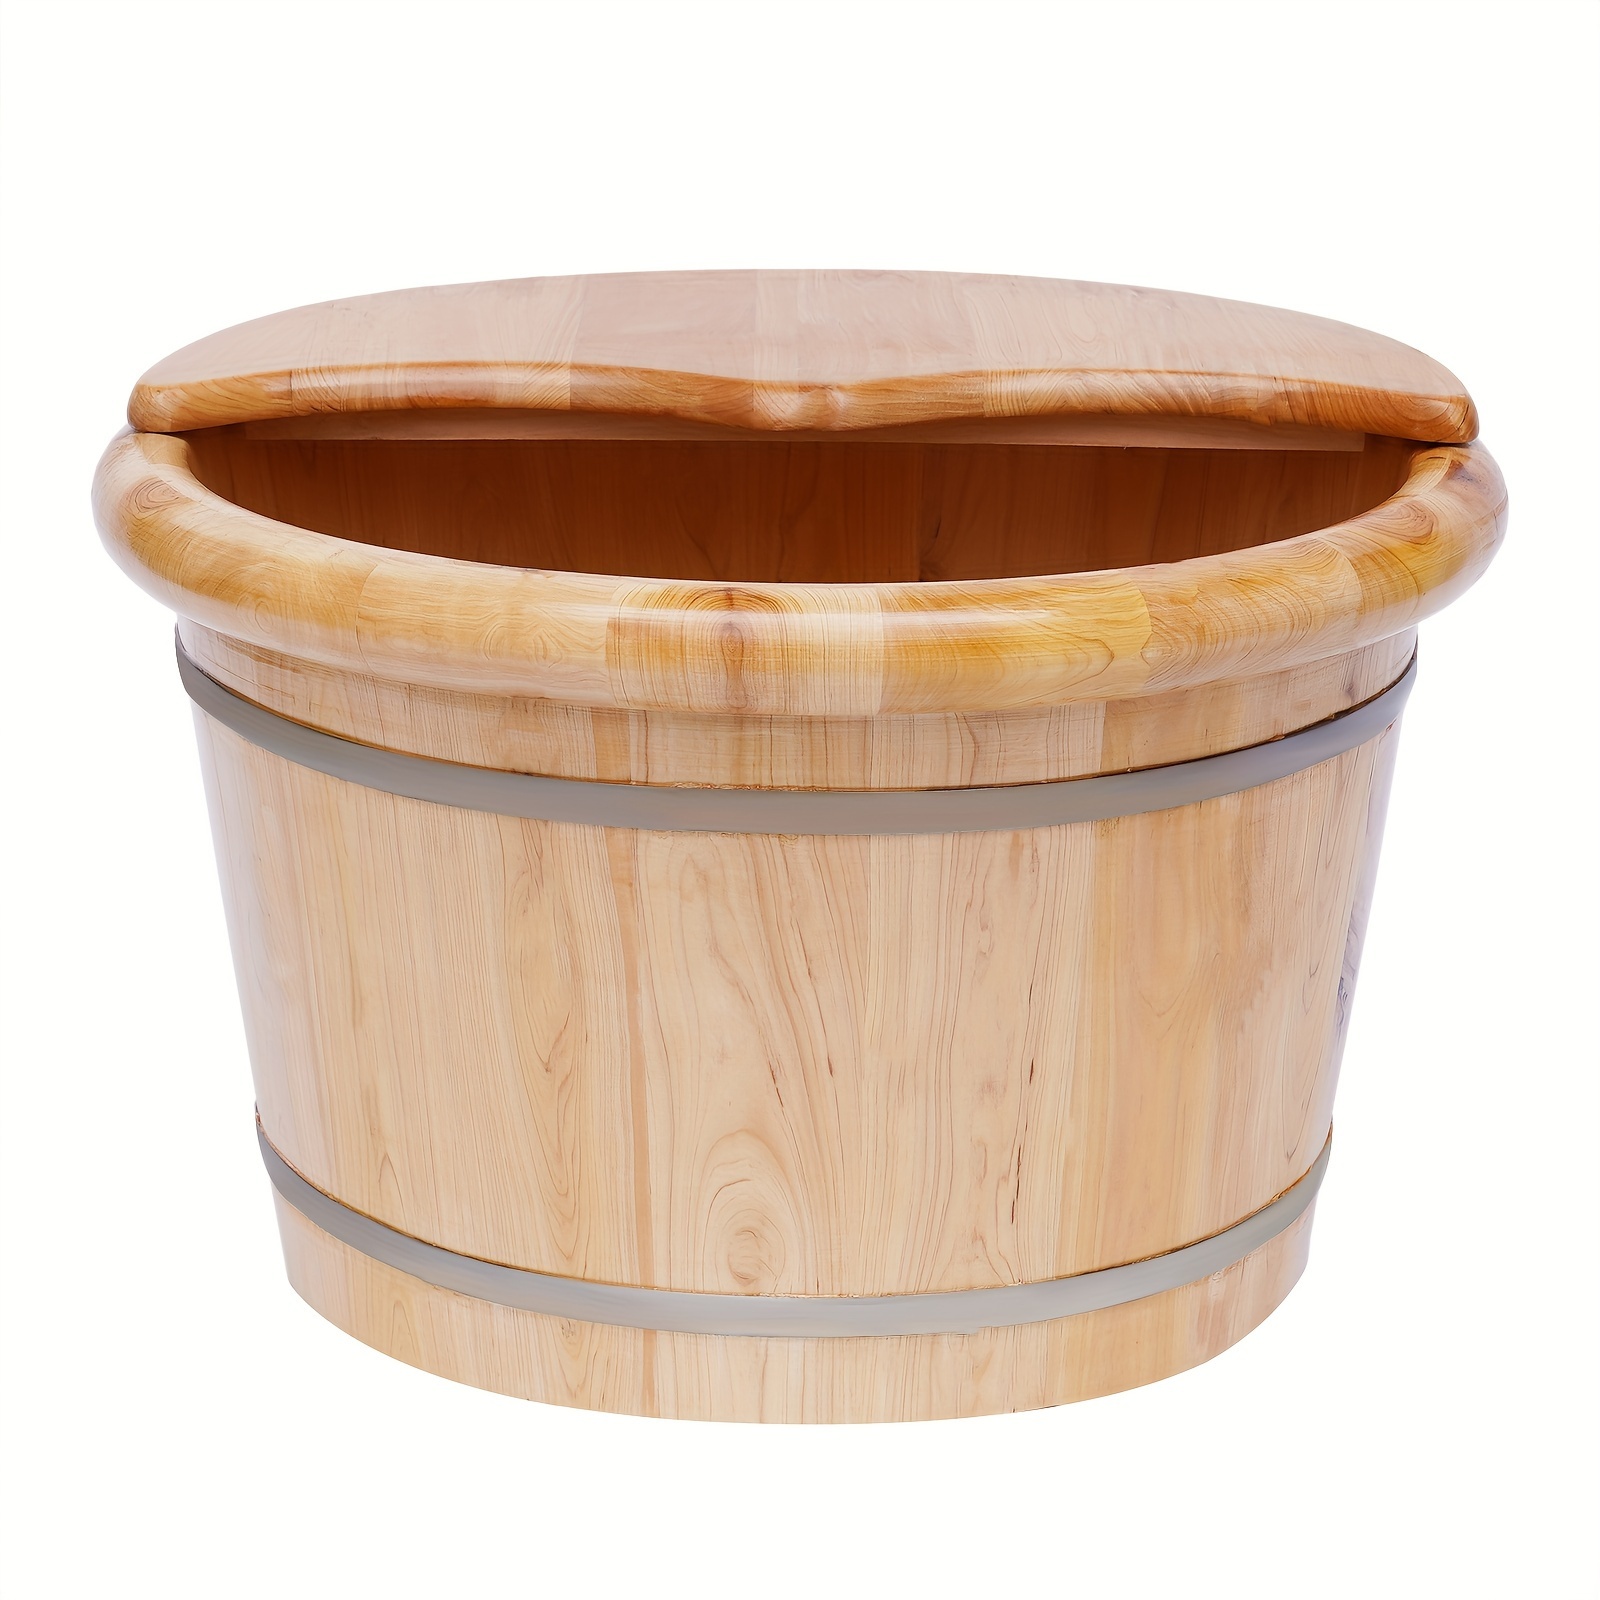 

Traditional Cedar Foot Bath Tub - Great For Massage And Relaxation Therapies